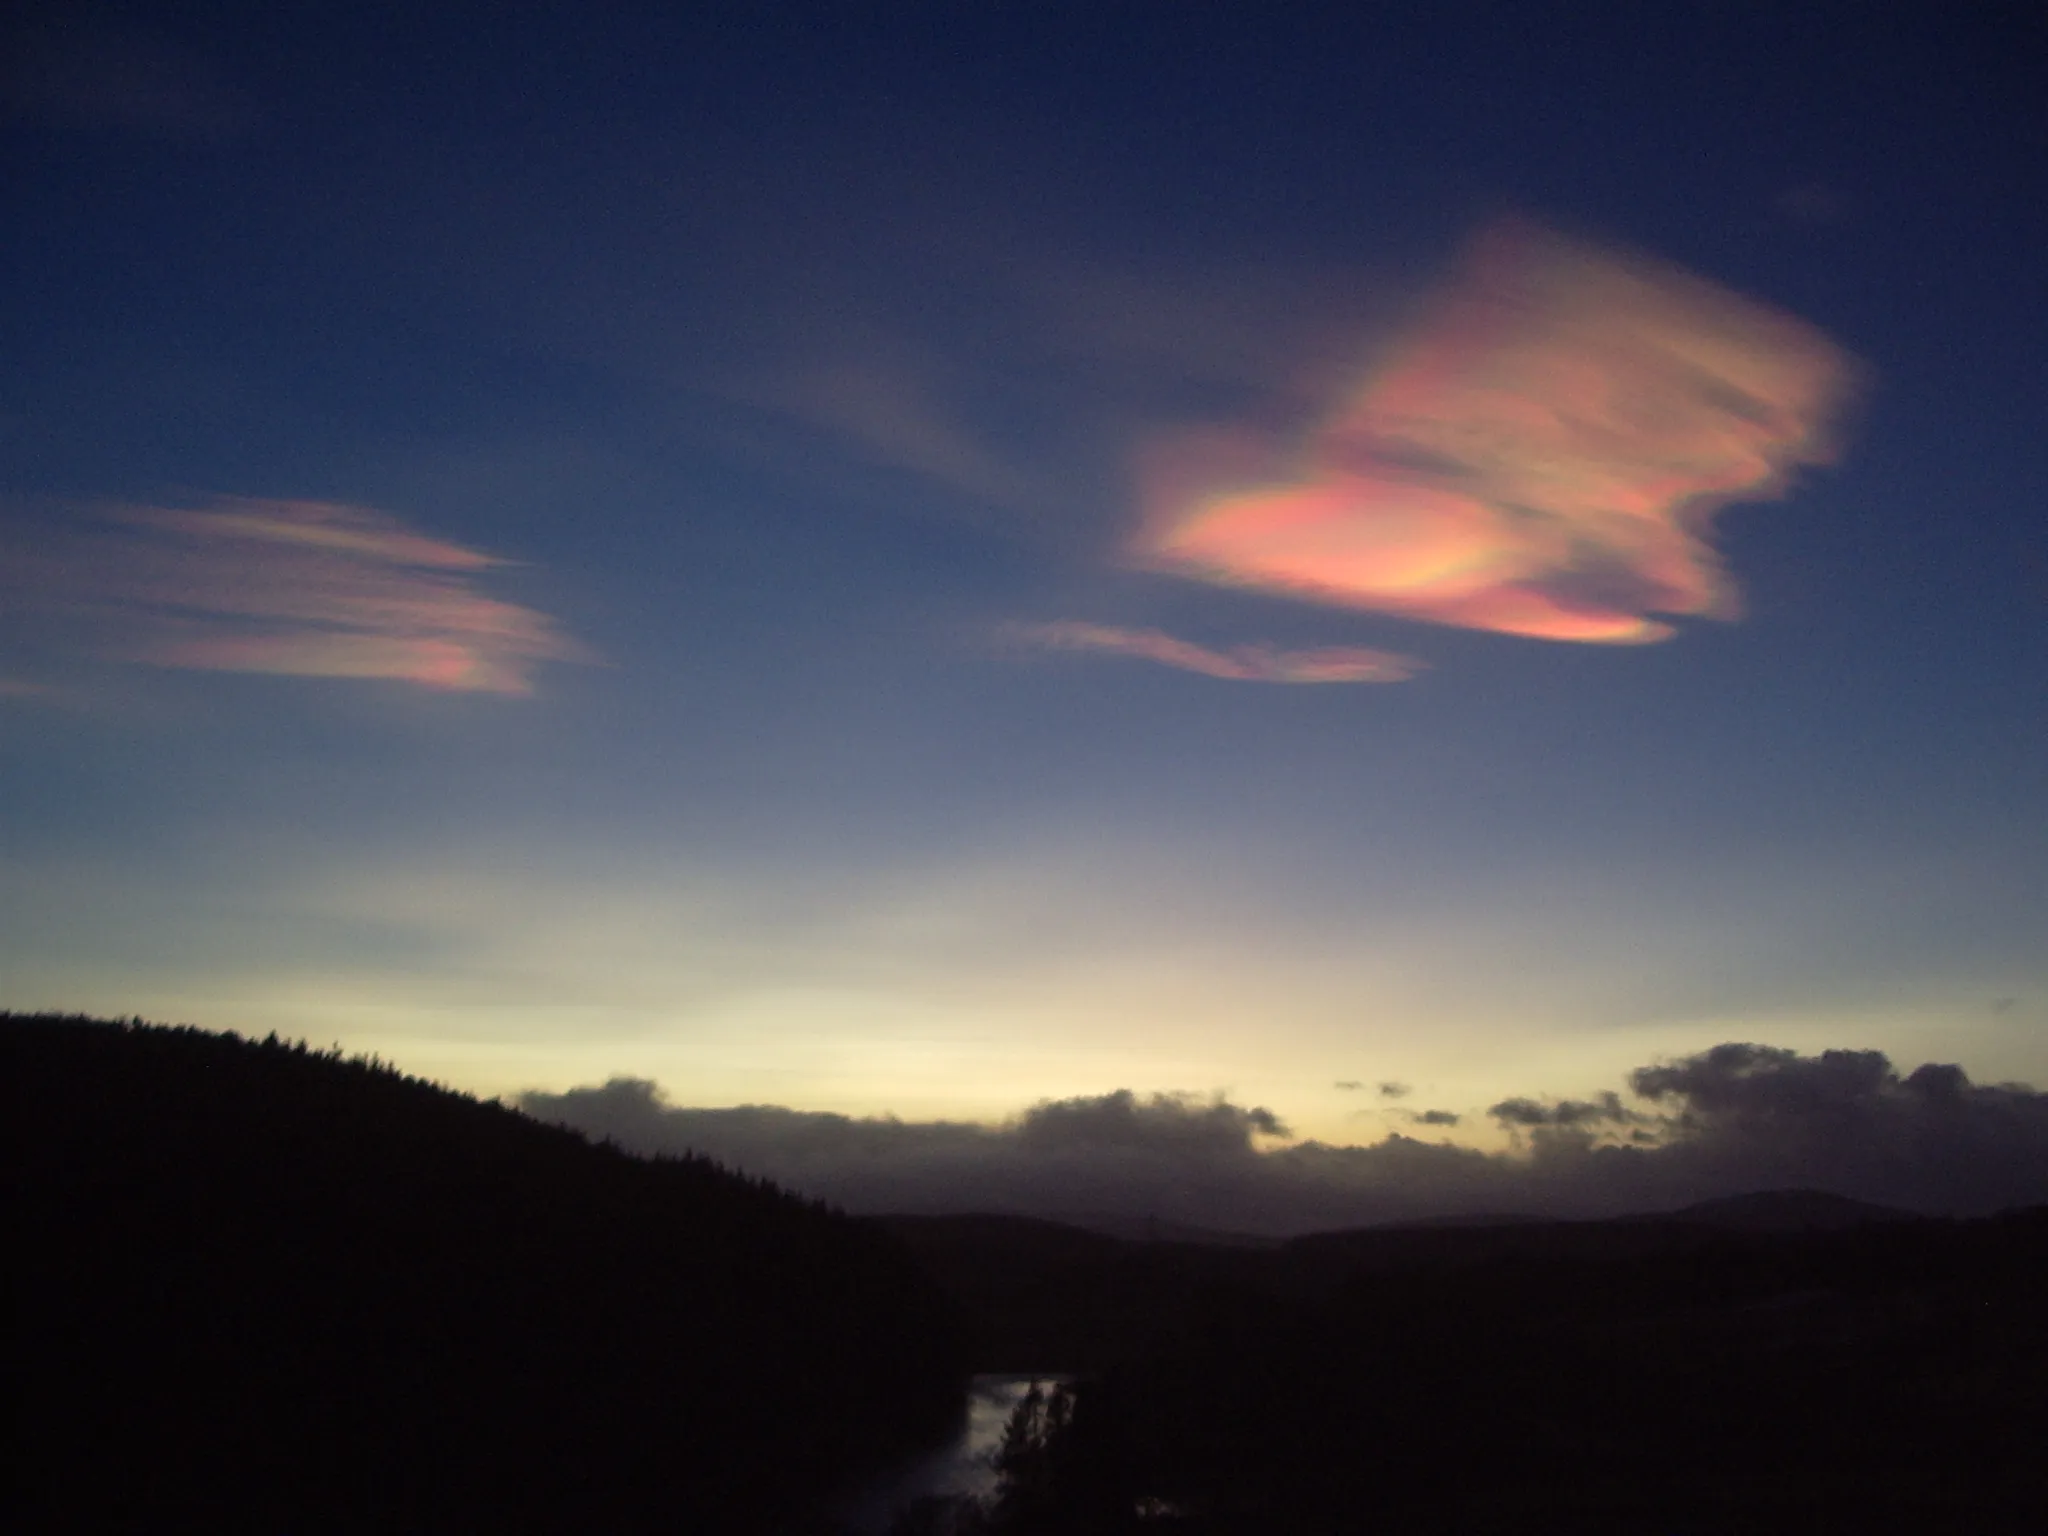 Photo showing: Nacreous clouds, Aberdeenshire, UK. 9 December 2012. Taken 16:05 9 December 2012. About 30 minutes after sunset looking south-west. The sun would have set at 15:27 above the left bank of the river and would have been about 5 degrees below the horizon when the photo was taken. Almanac: http://www.esrl.noaa.gov/gmd/grad/solcalc/ The camera time was 25 minutes fast.